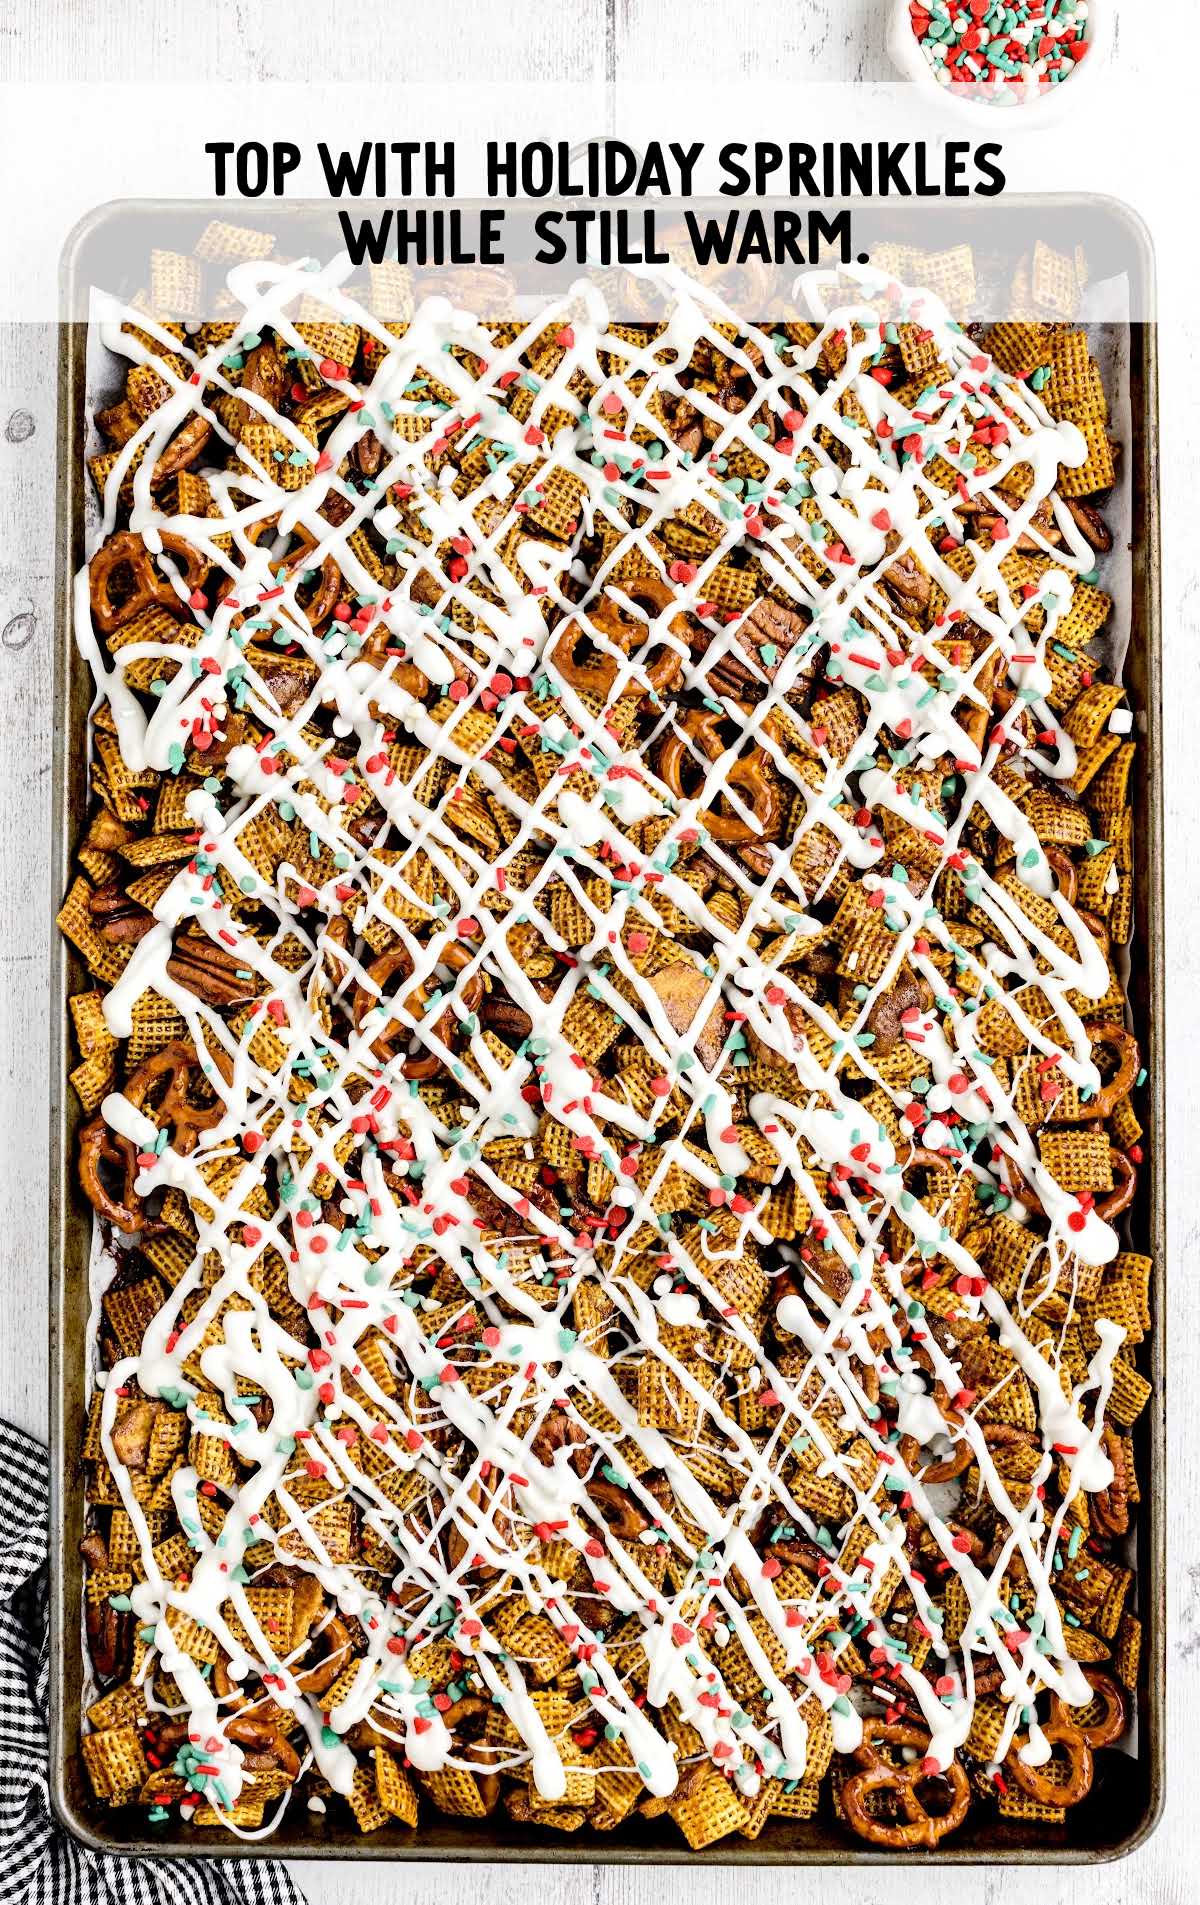 sprinkles sprinkled on top of the chex mix on a baking sheet